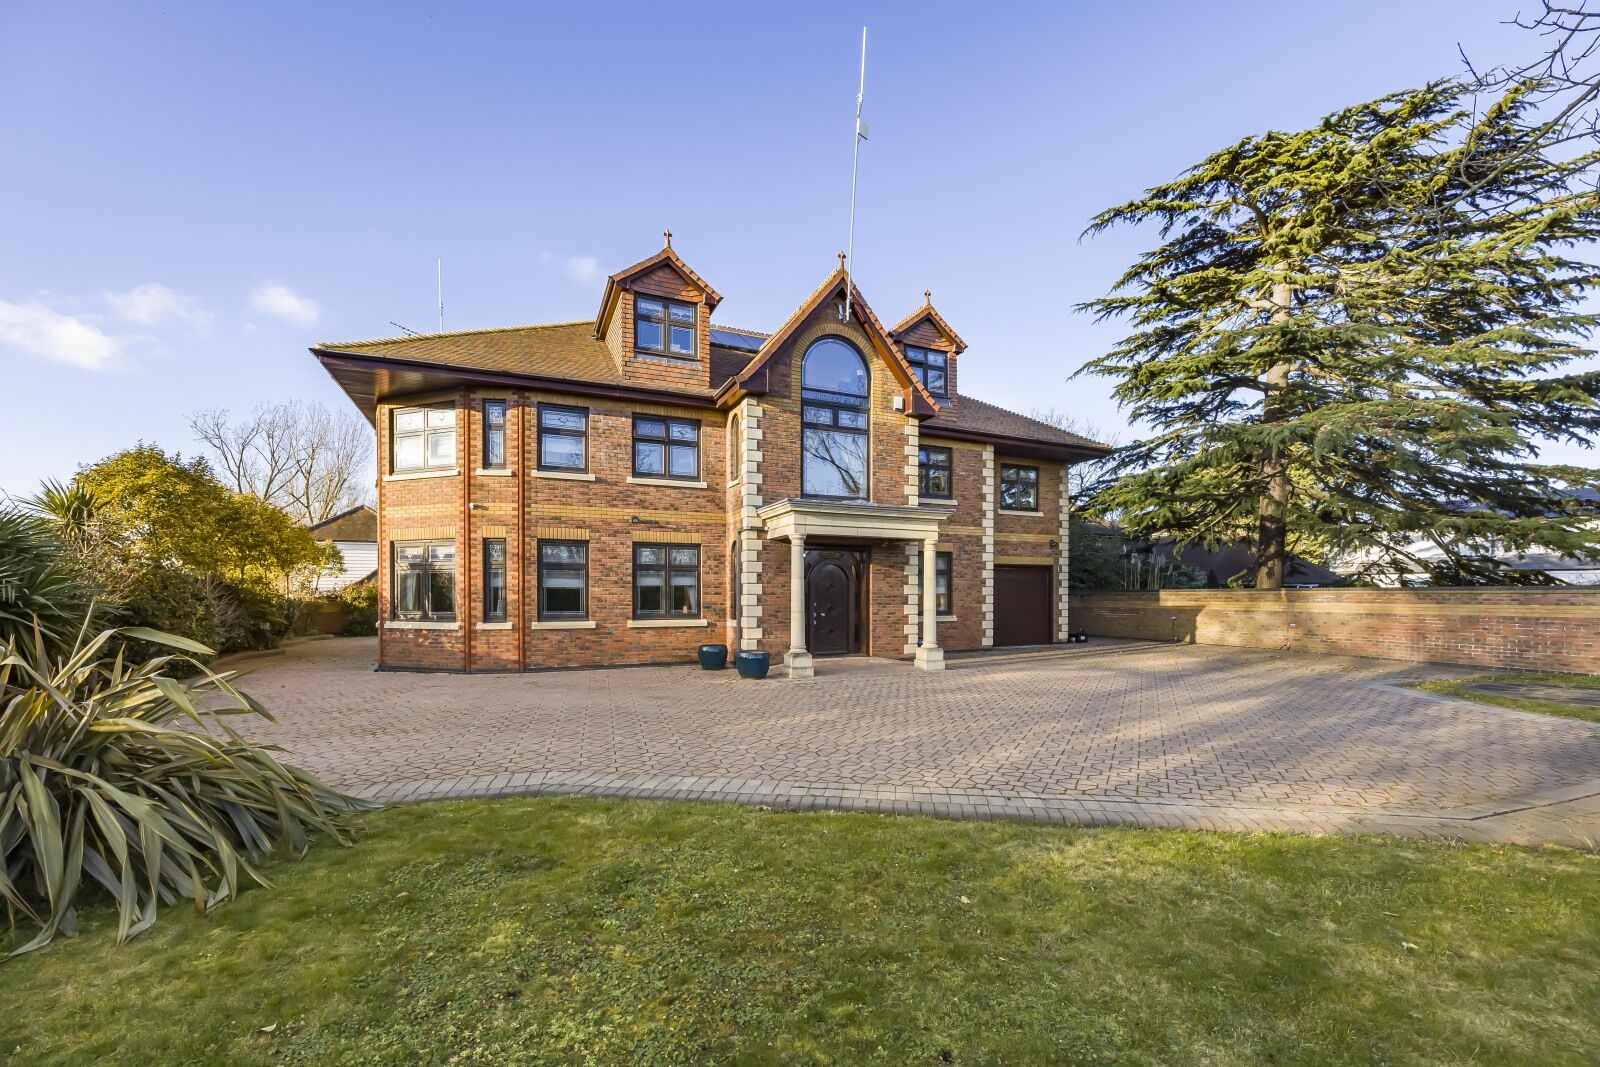 8 bedroom detached house for sale Lambourne Road, Chigwell, IG7, main image